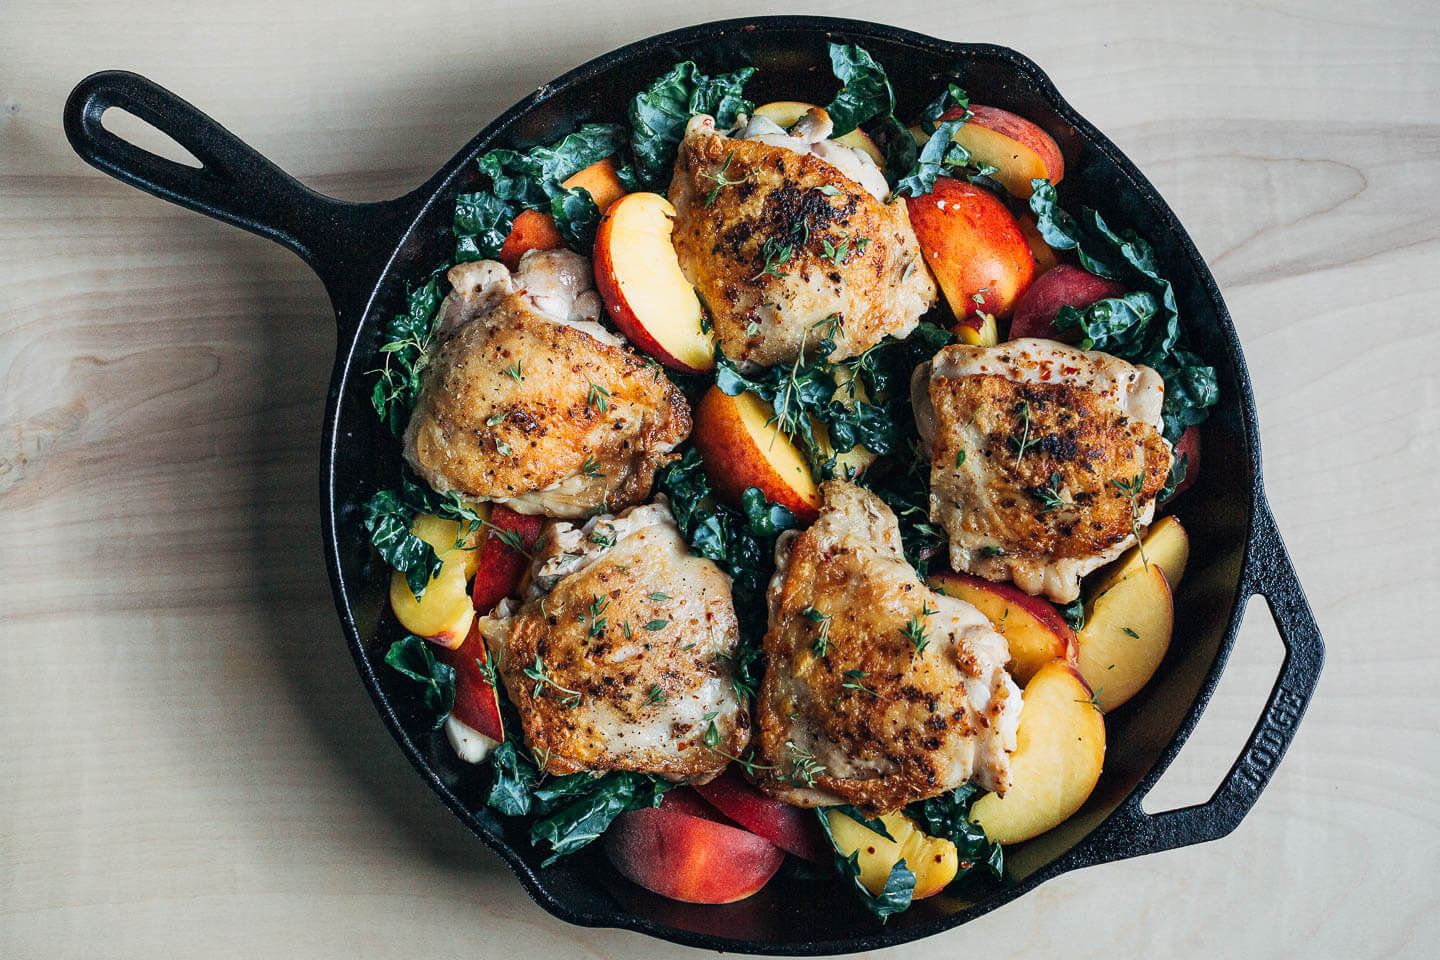 Seared chicken and peaches in a skillet, ready to bake